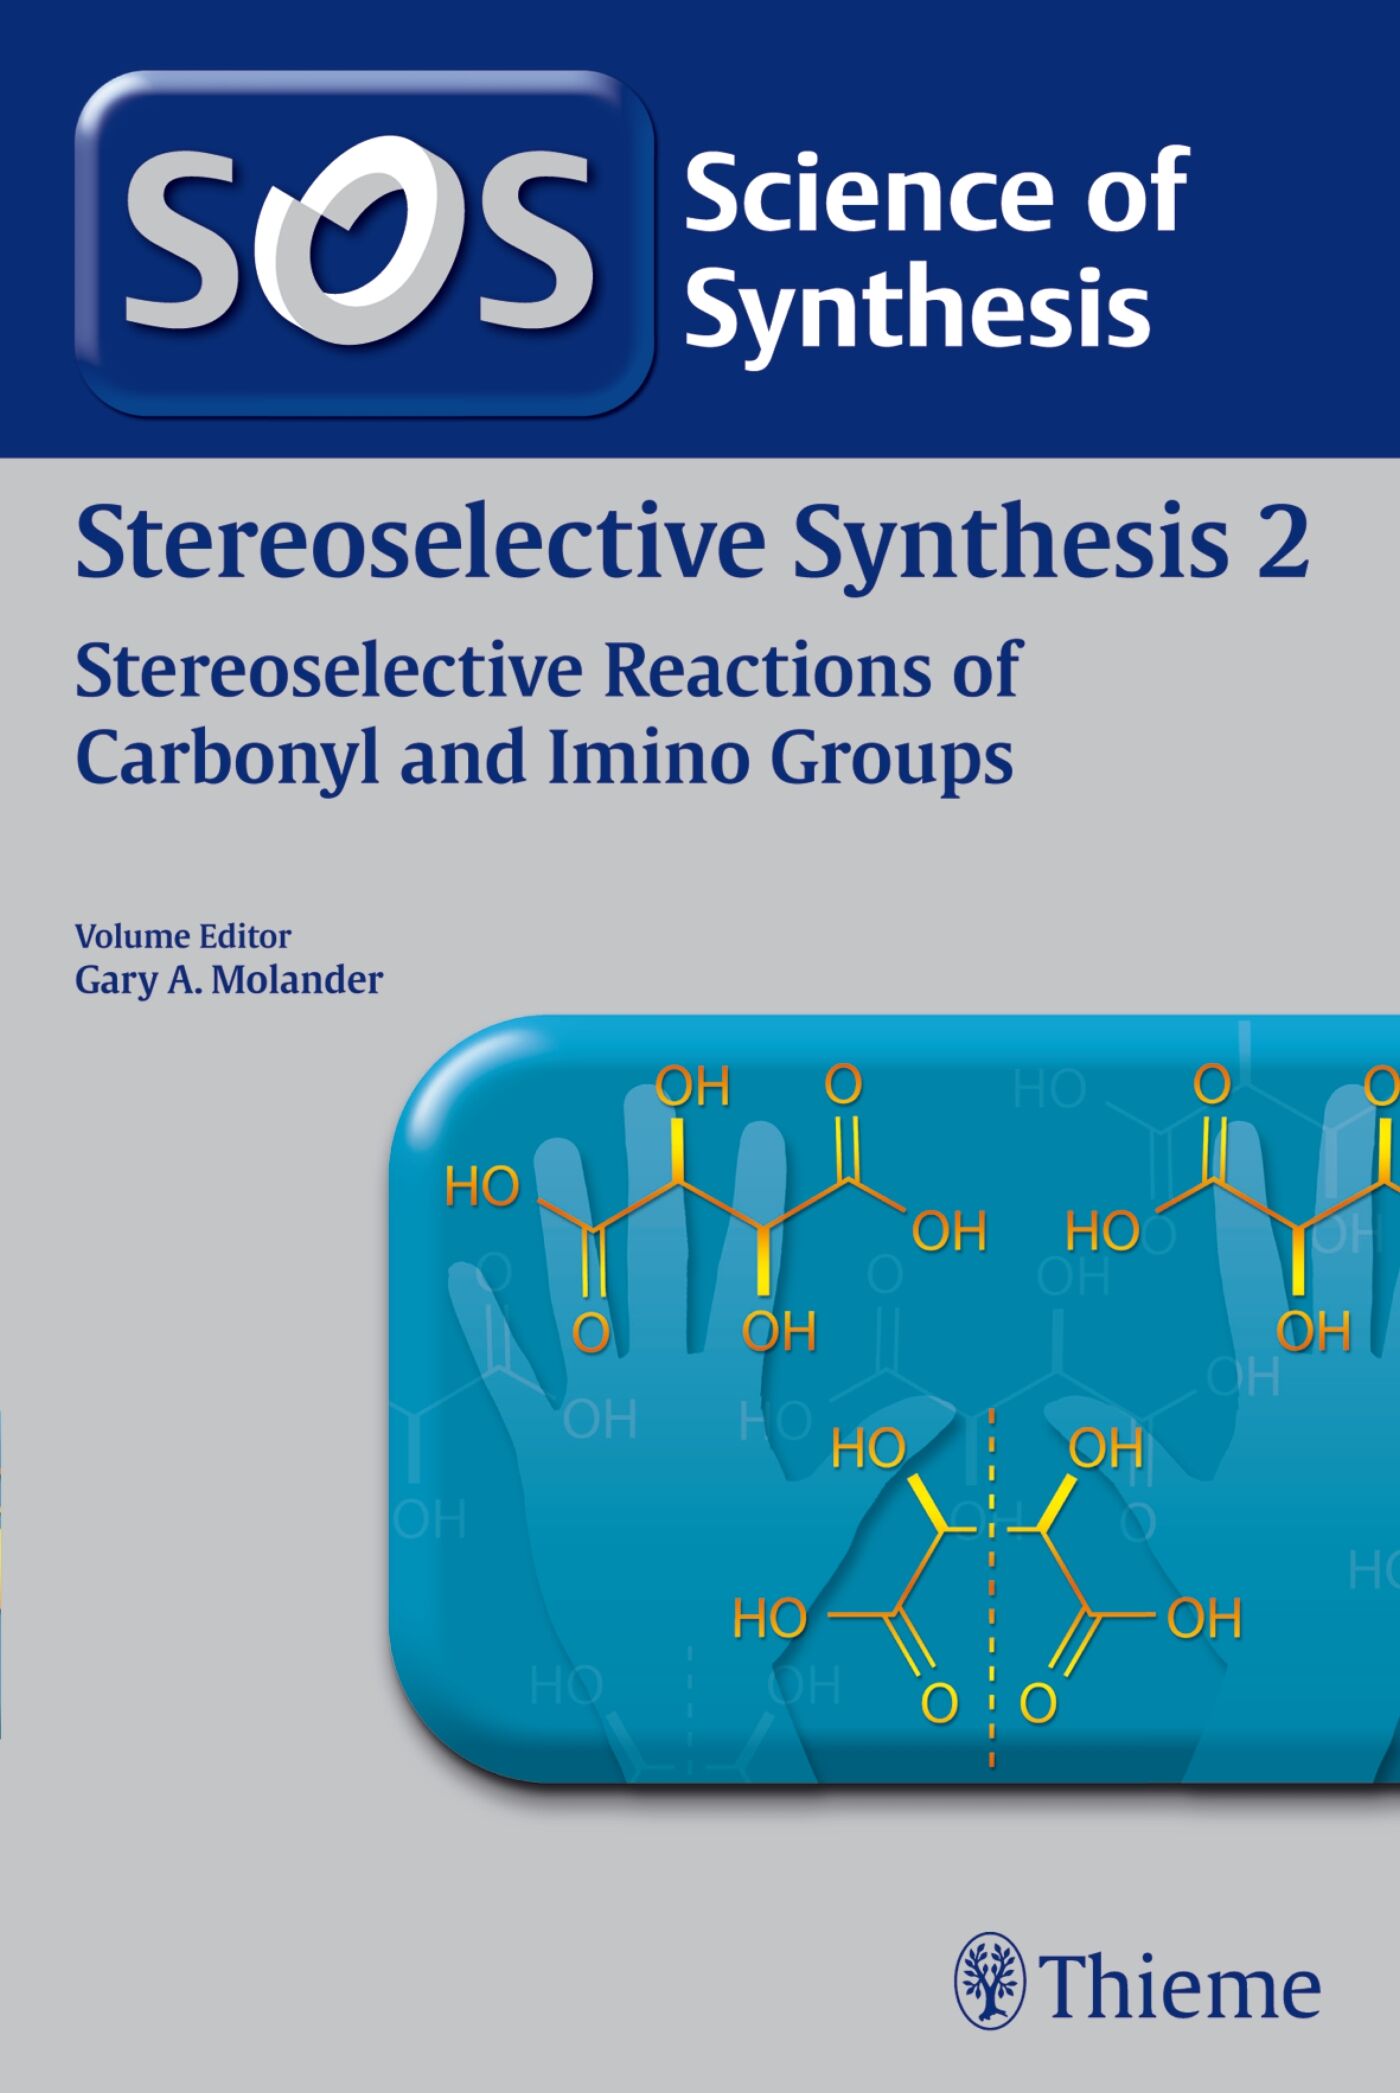 Science of Synthesis: Stereoselective Synthesis Vol. 2, 9783131789518